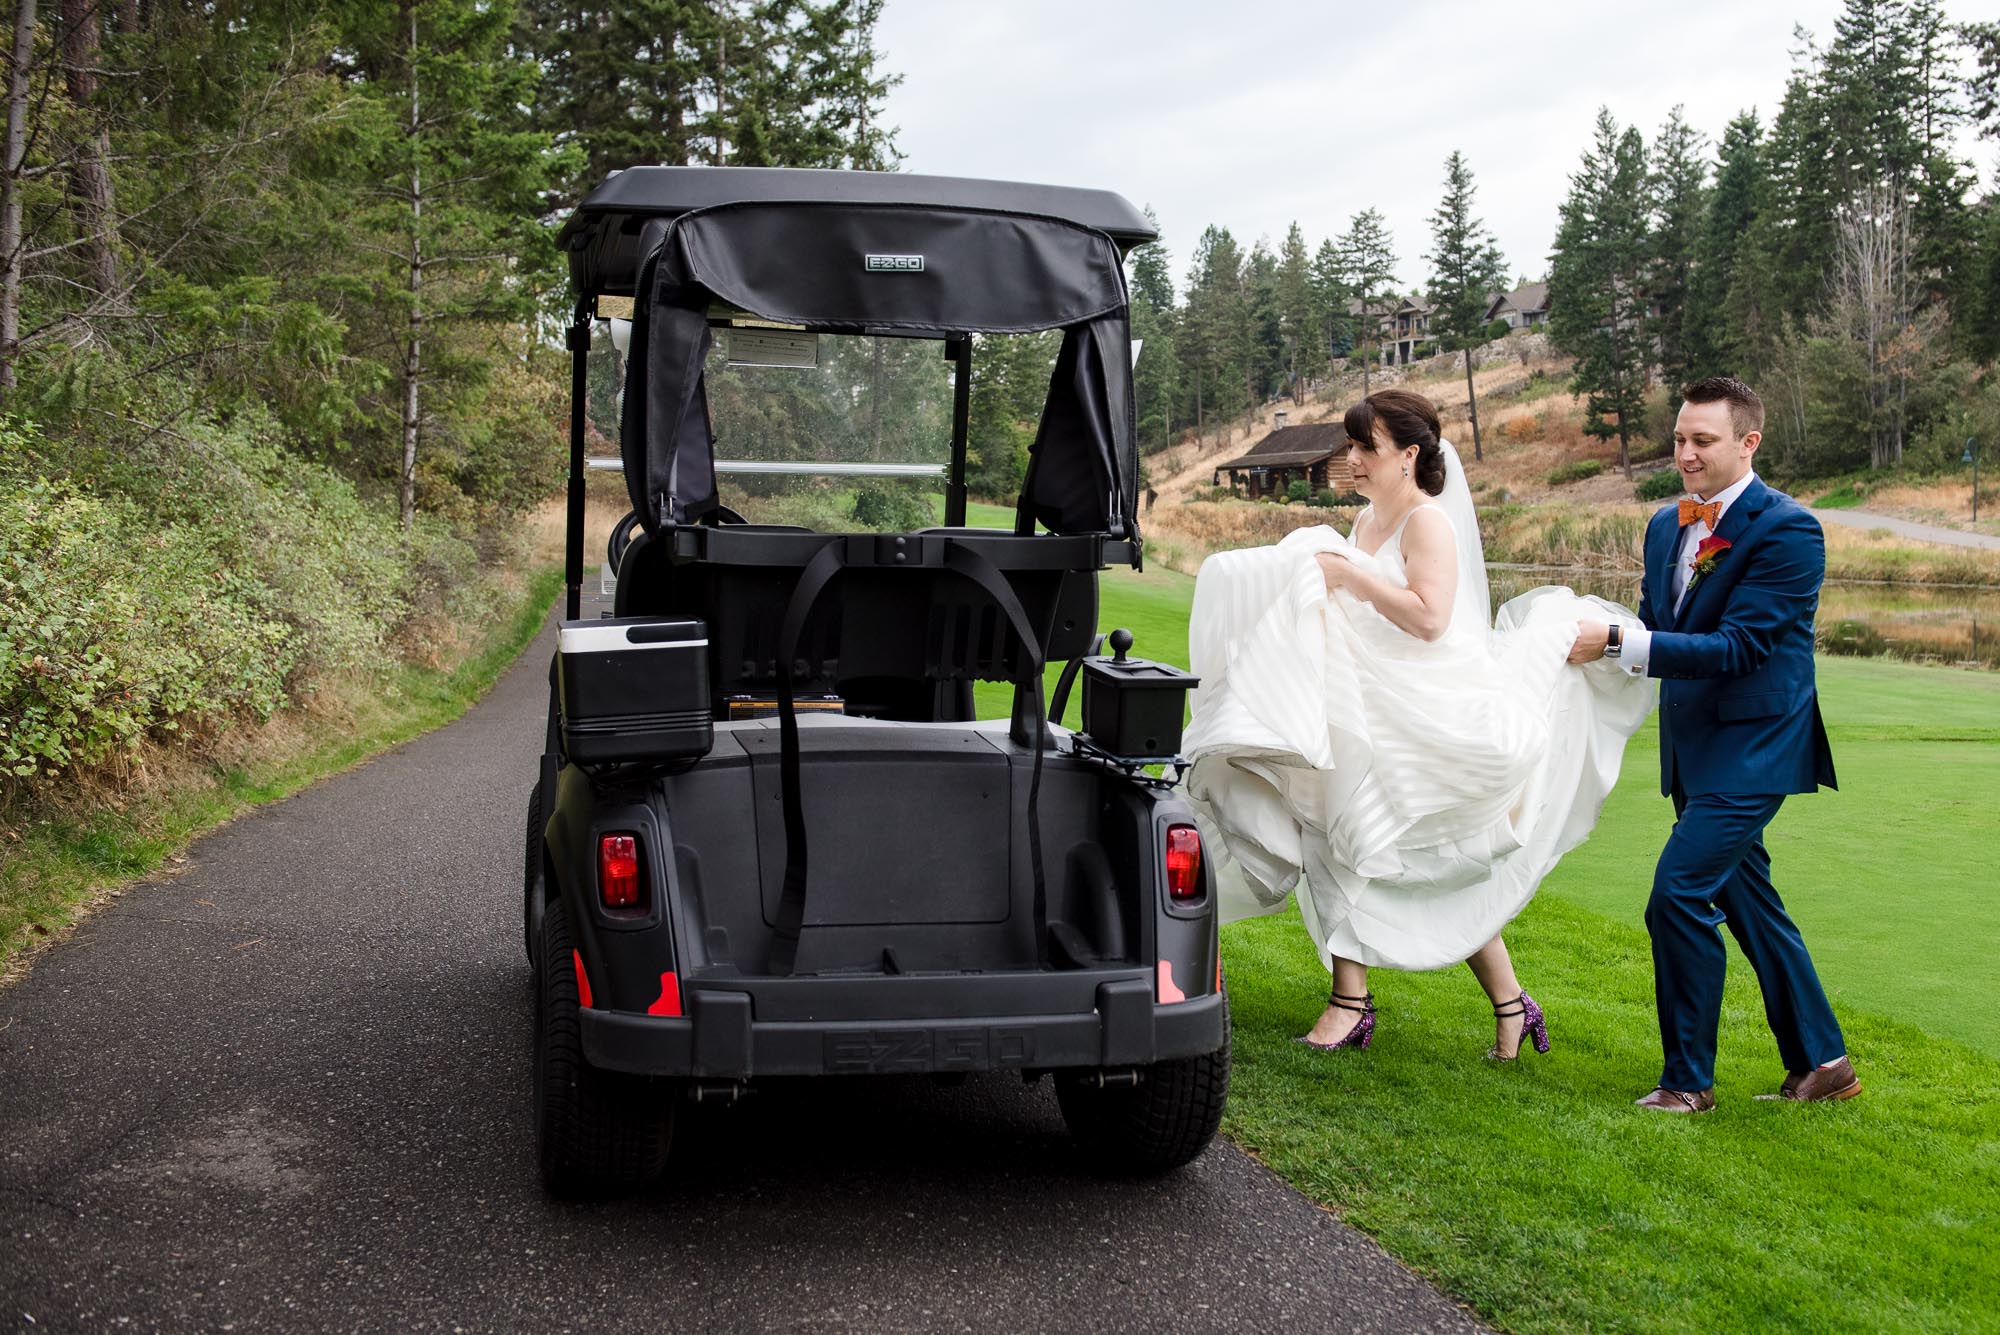 A bride gets into a golf cart during her wedding at Predator Ridge Resort in Penticton